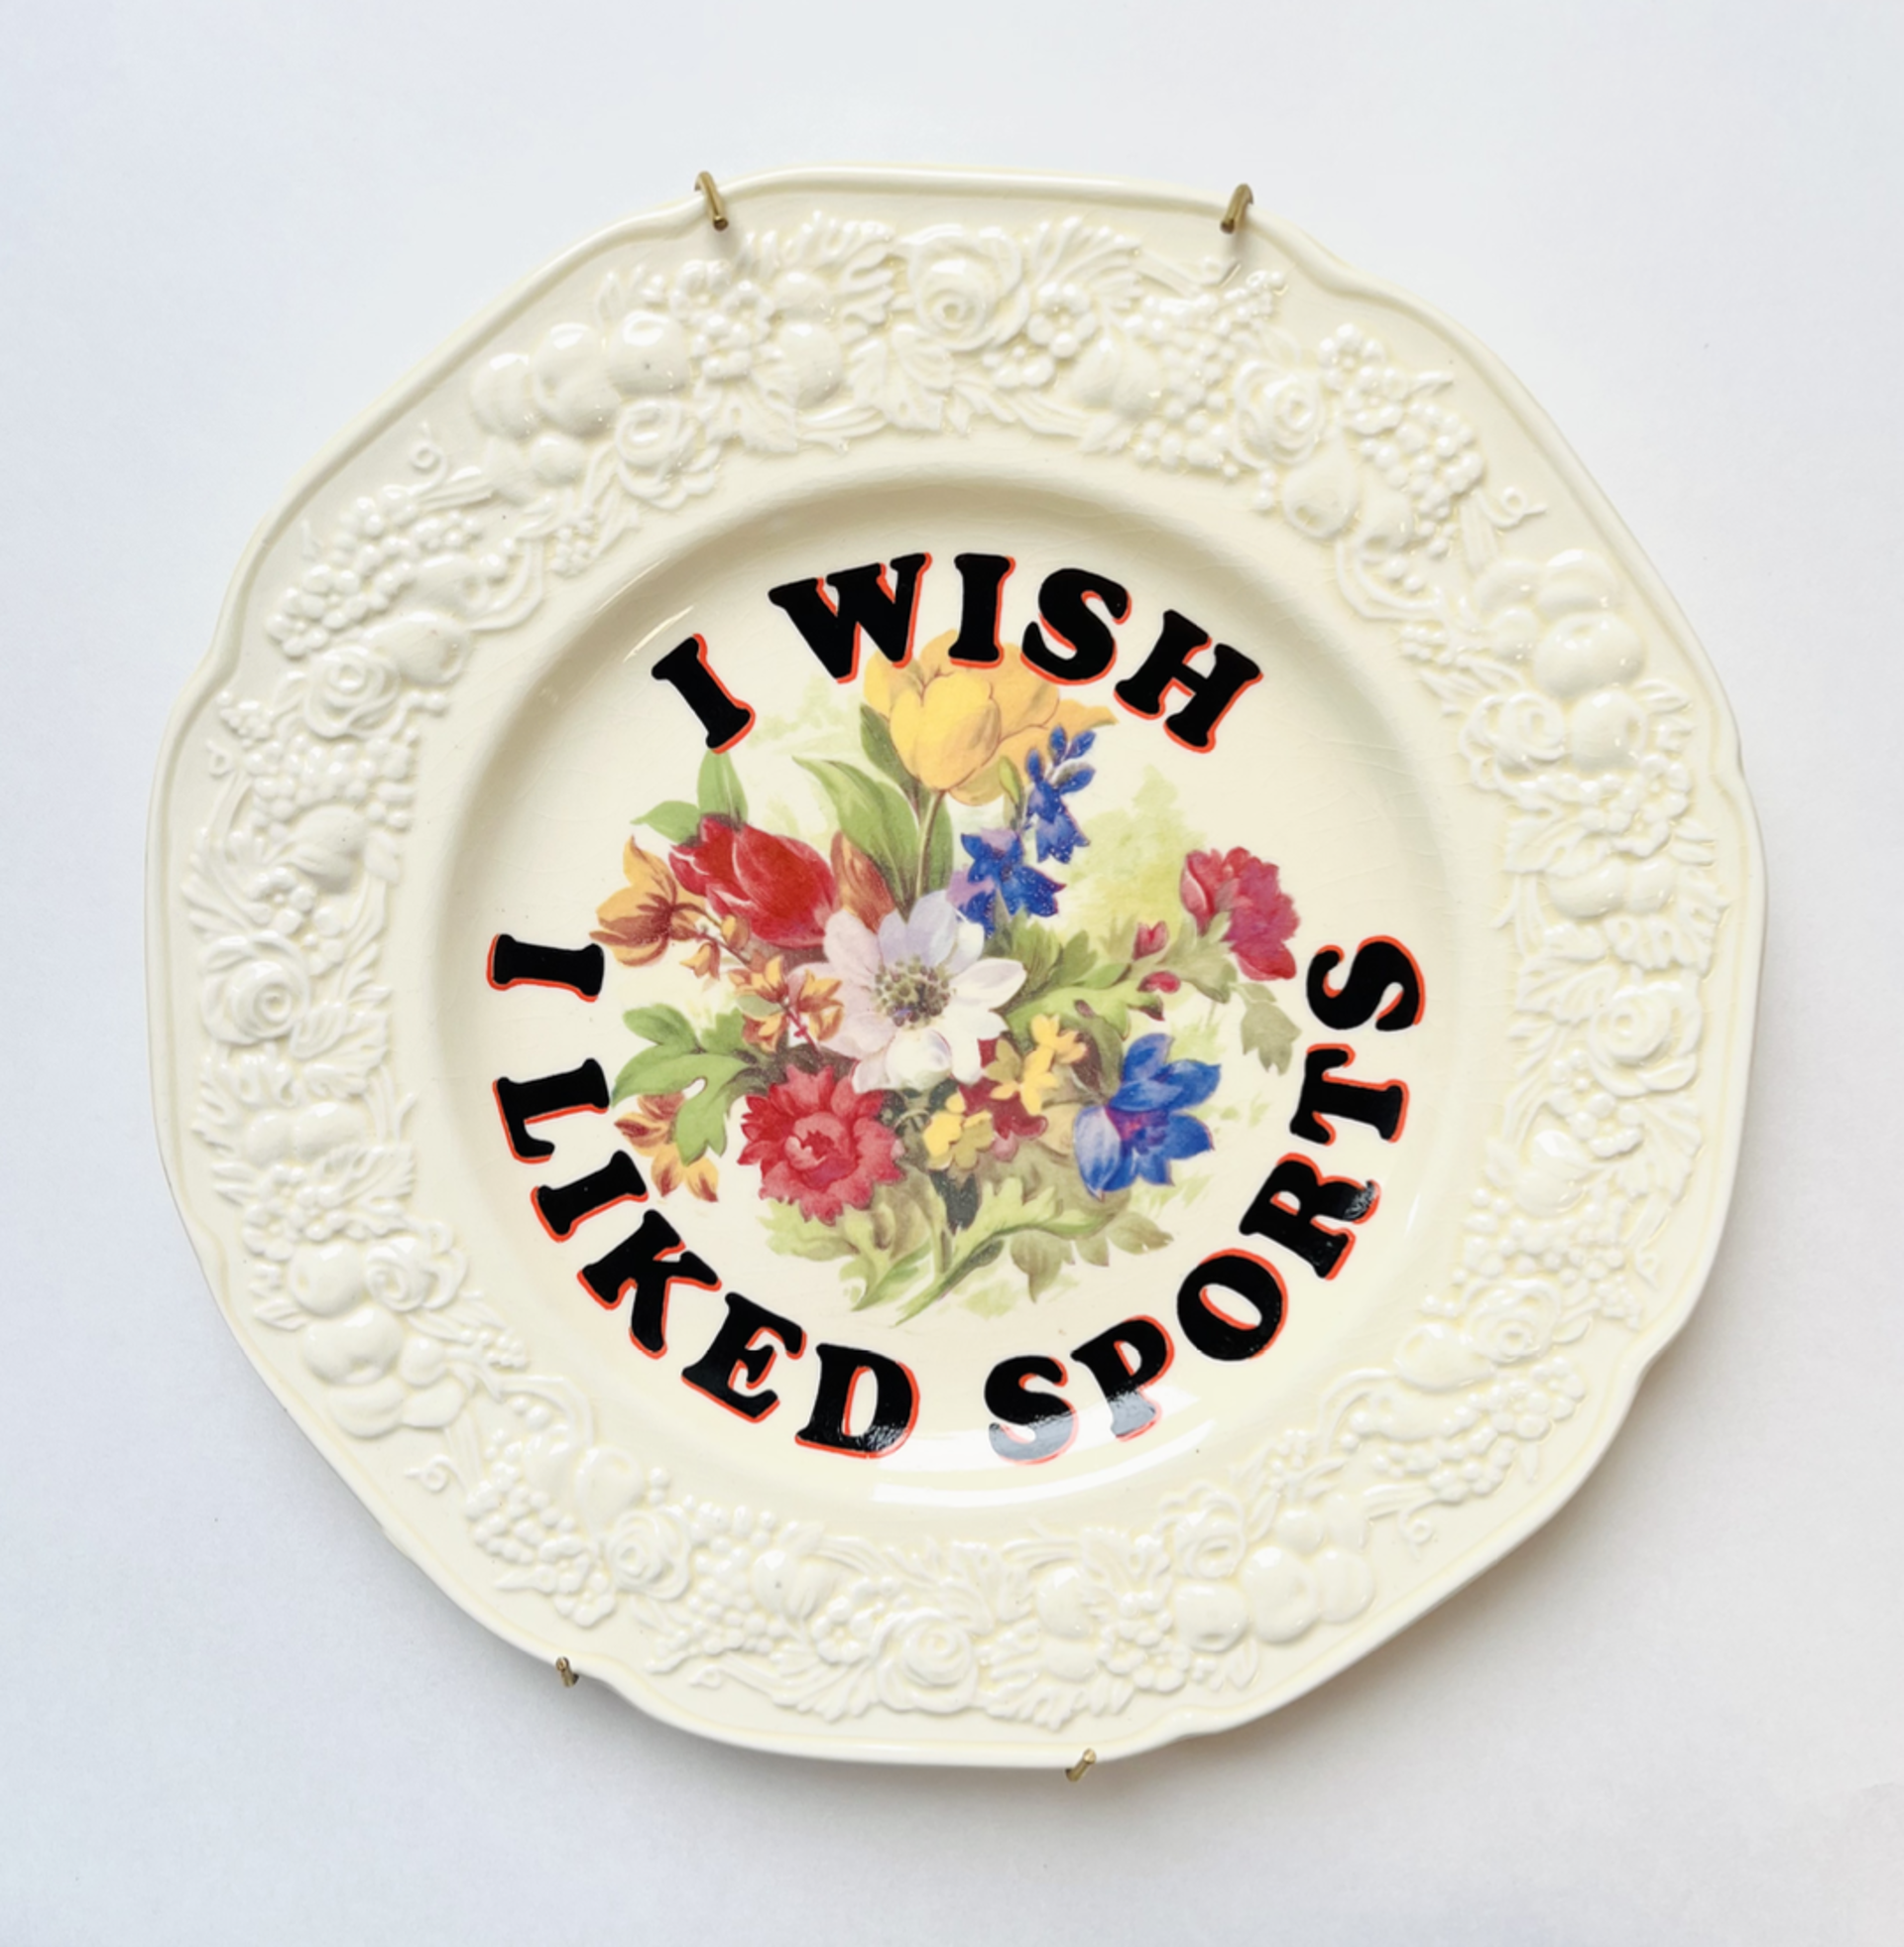 I Wish I Liked Sports (Dessert plate) by Marie-Claude Marquis